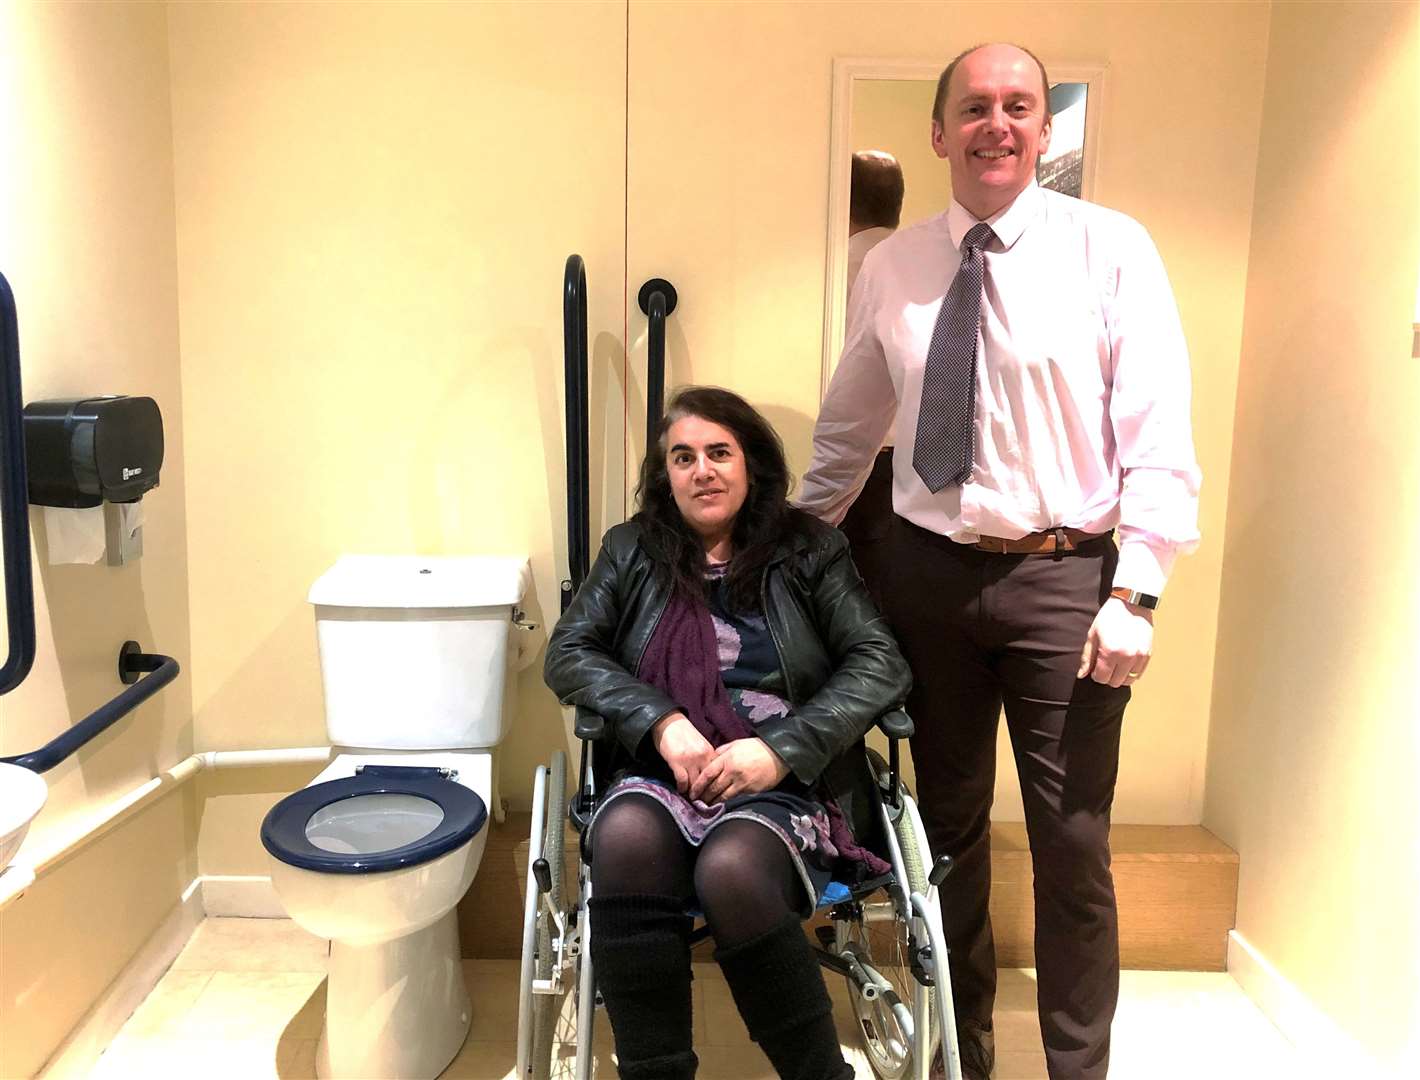 Louise Smith with hotel owner Andrew Mackay at the Norseman's disabled toilet in Wick. Louise campaigned for years to see local provision for the disabled improved throughout the county.